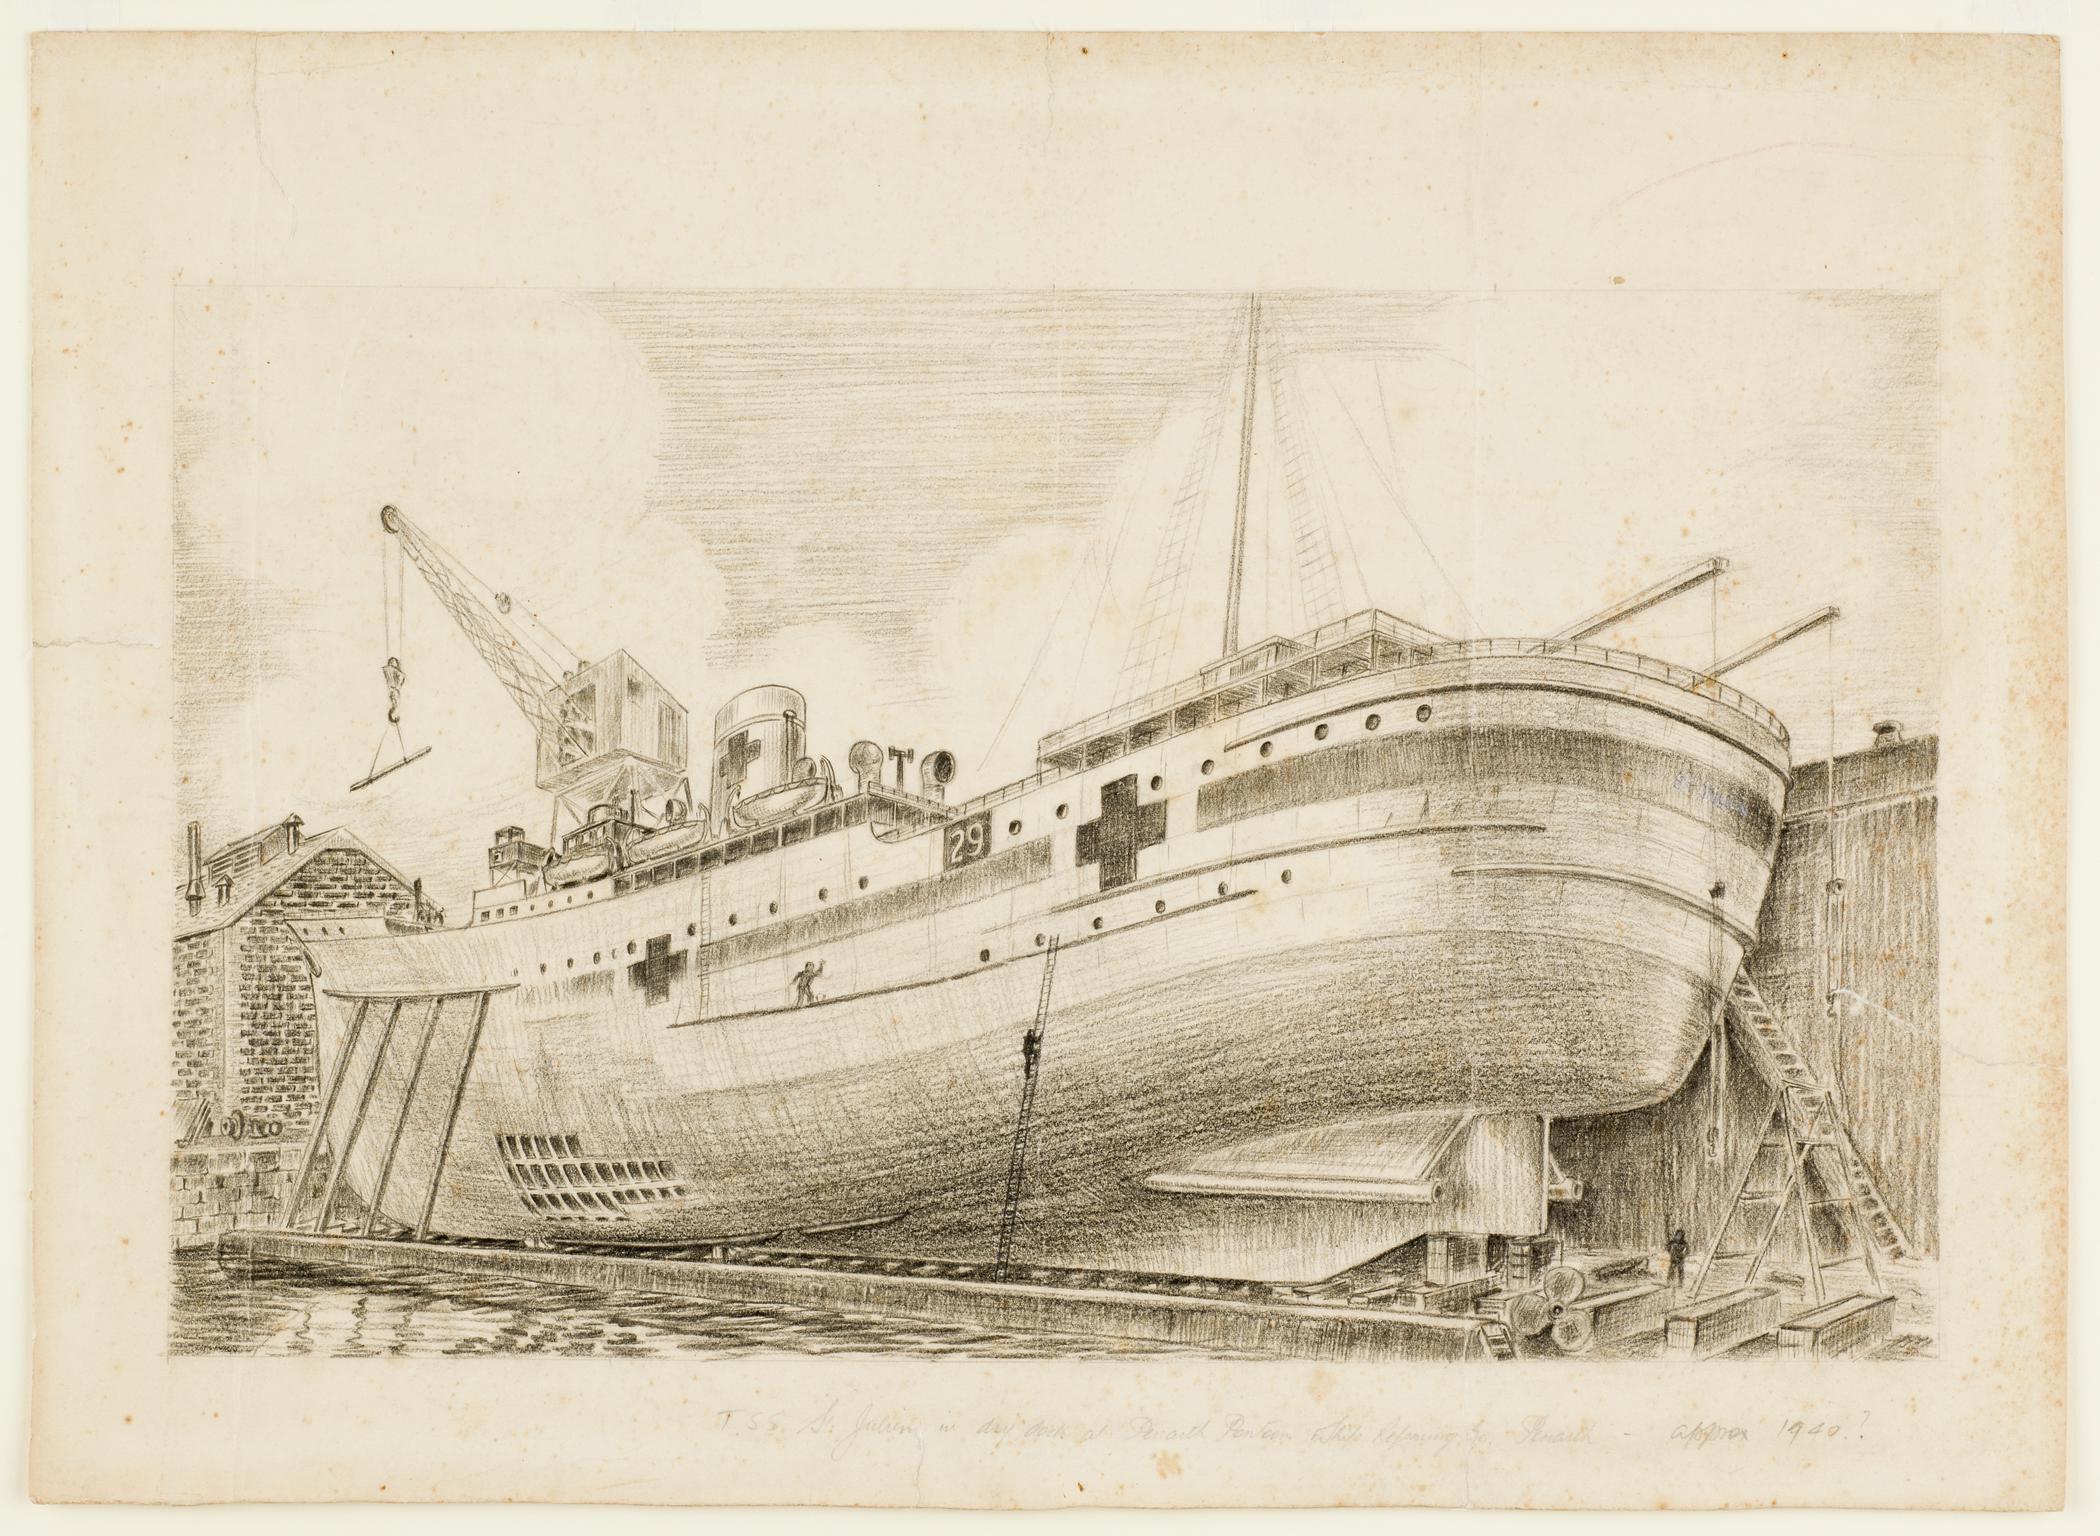 T.S.S. ST JULIEN in Dry Dock at Penarth Pontoon (drawing)